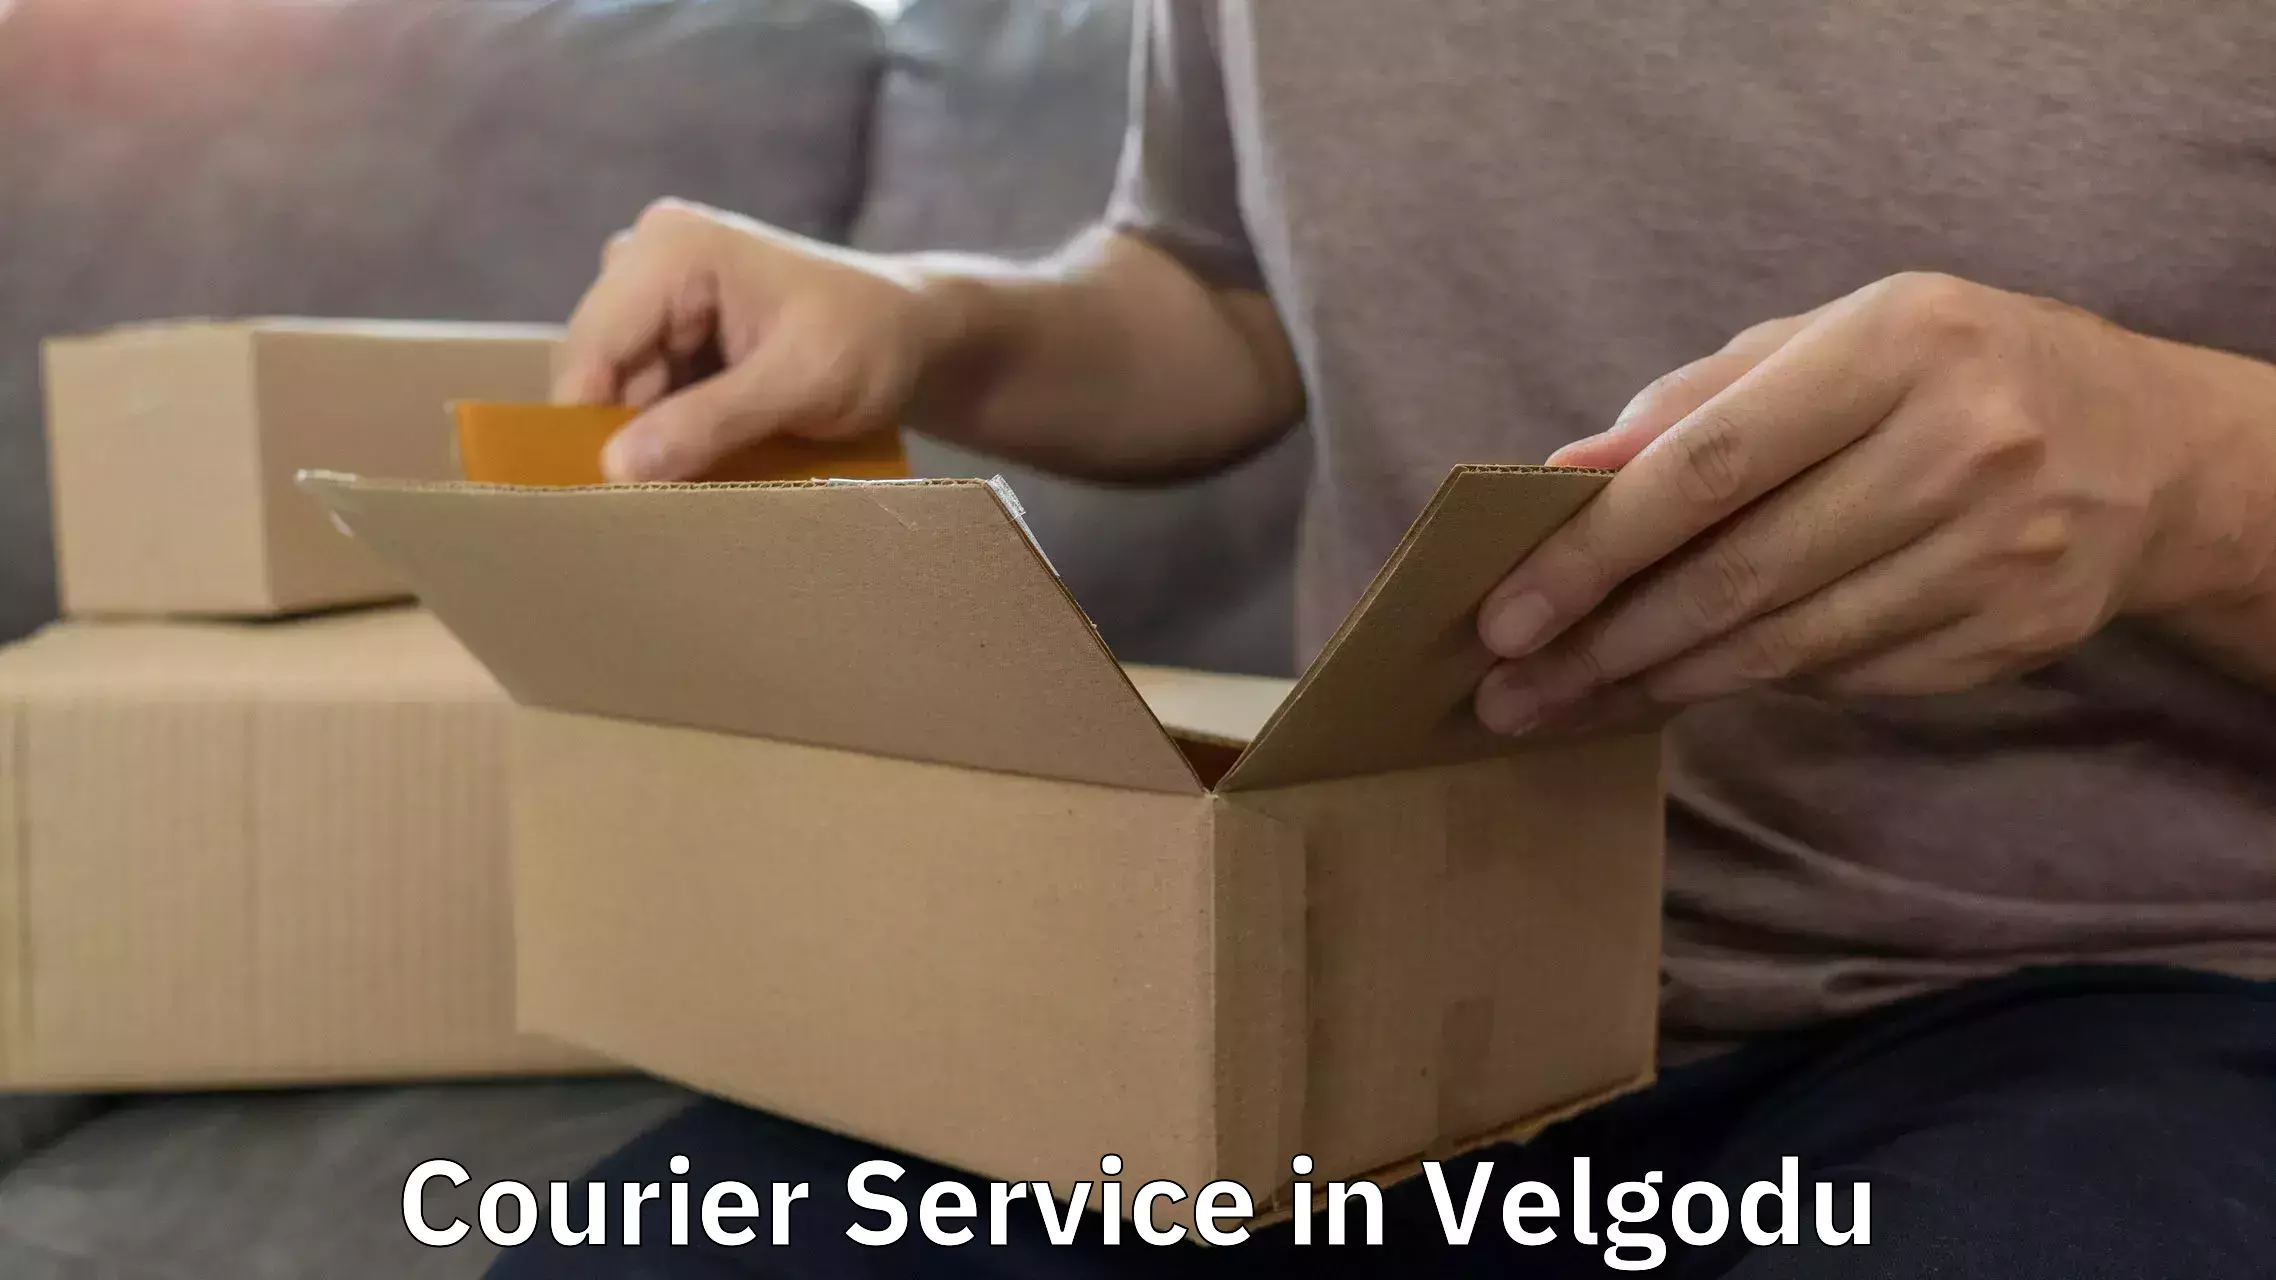 Courier services in Velgodu